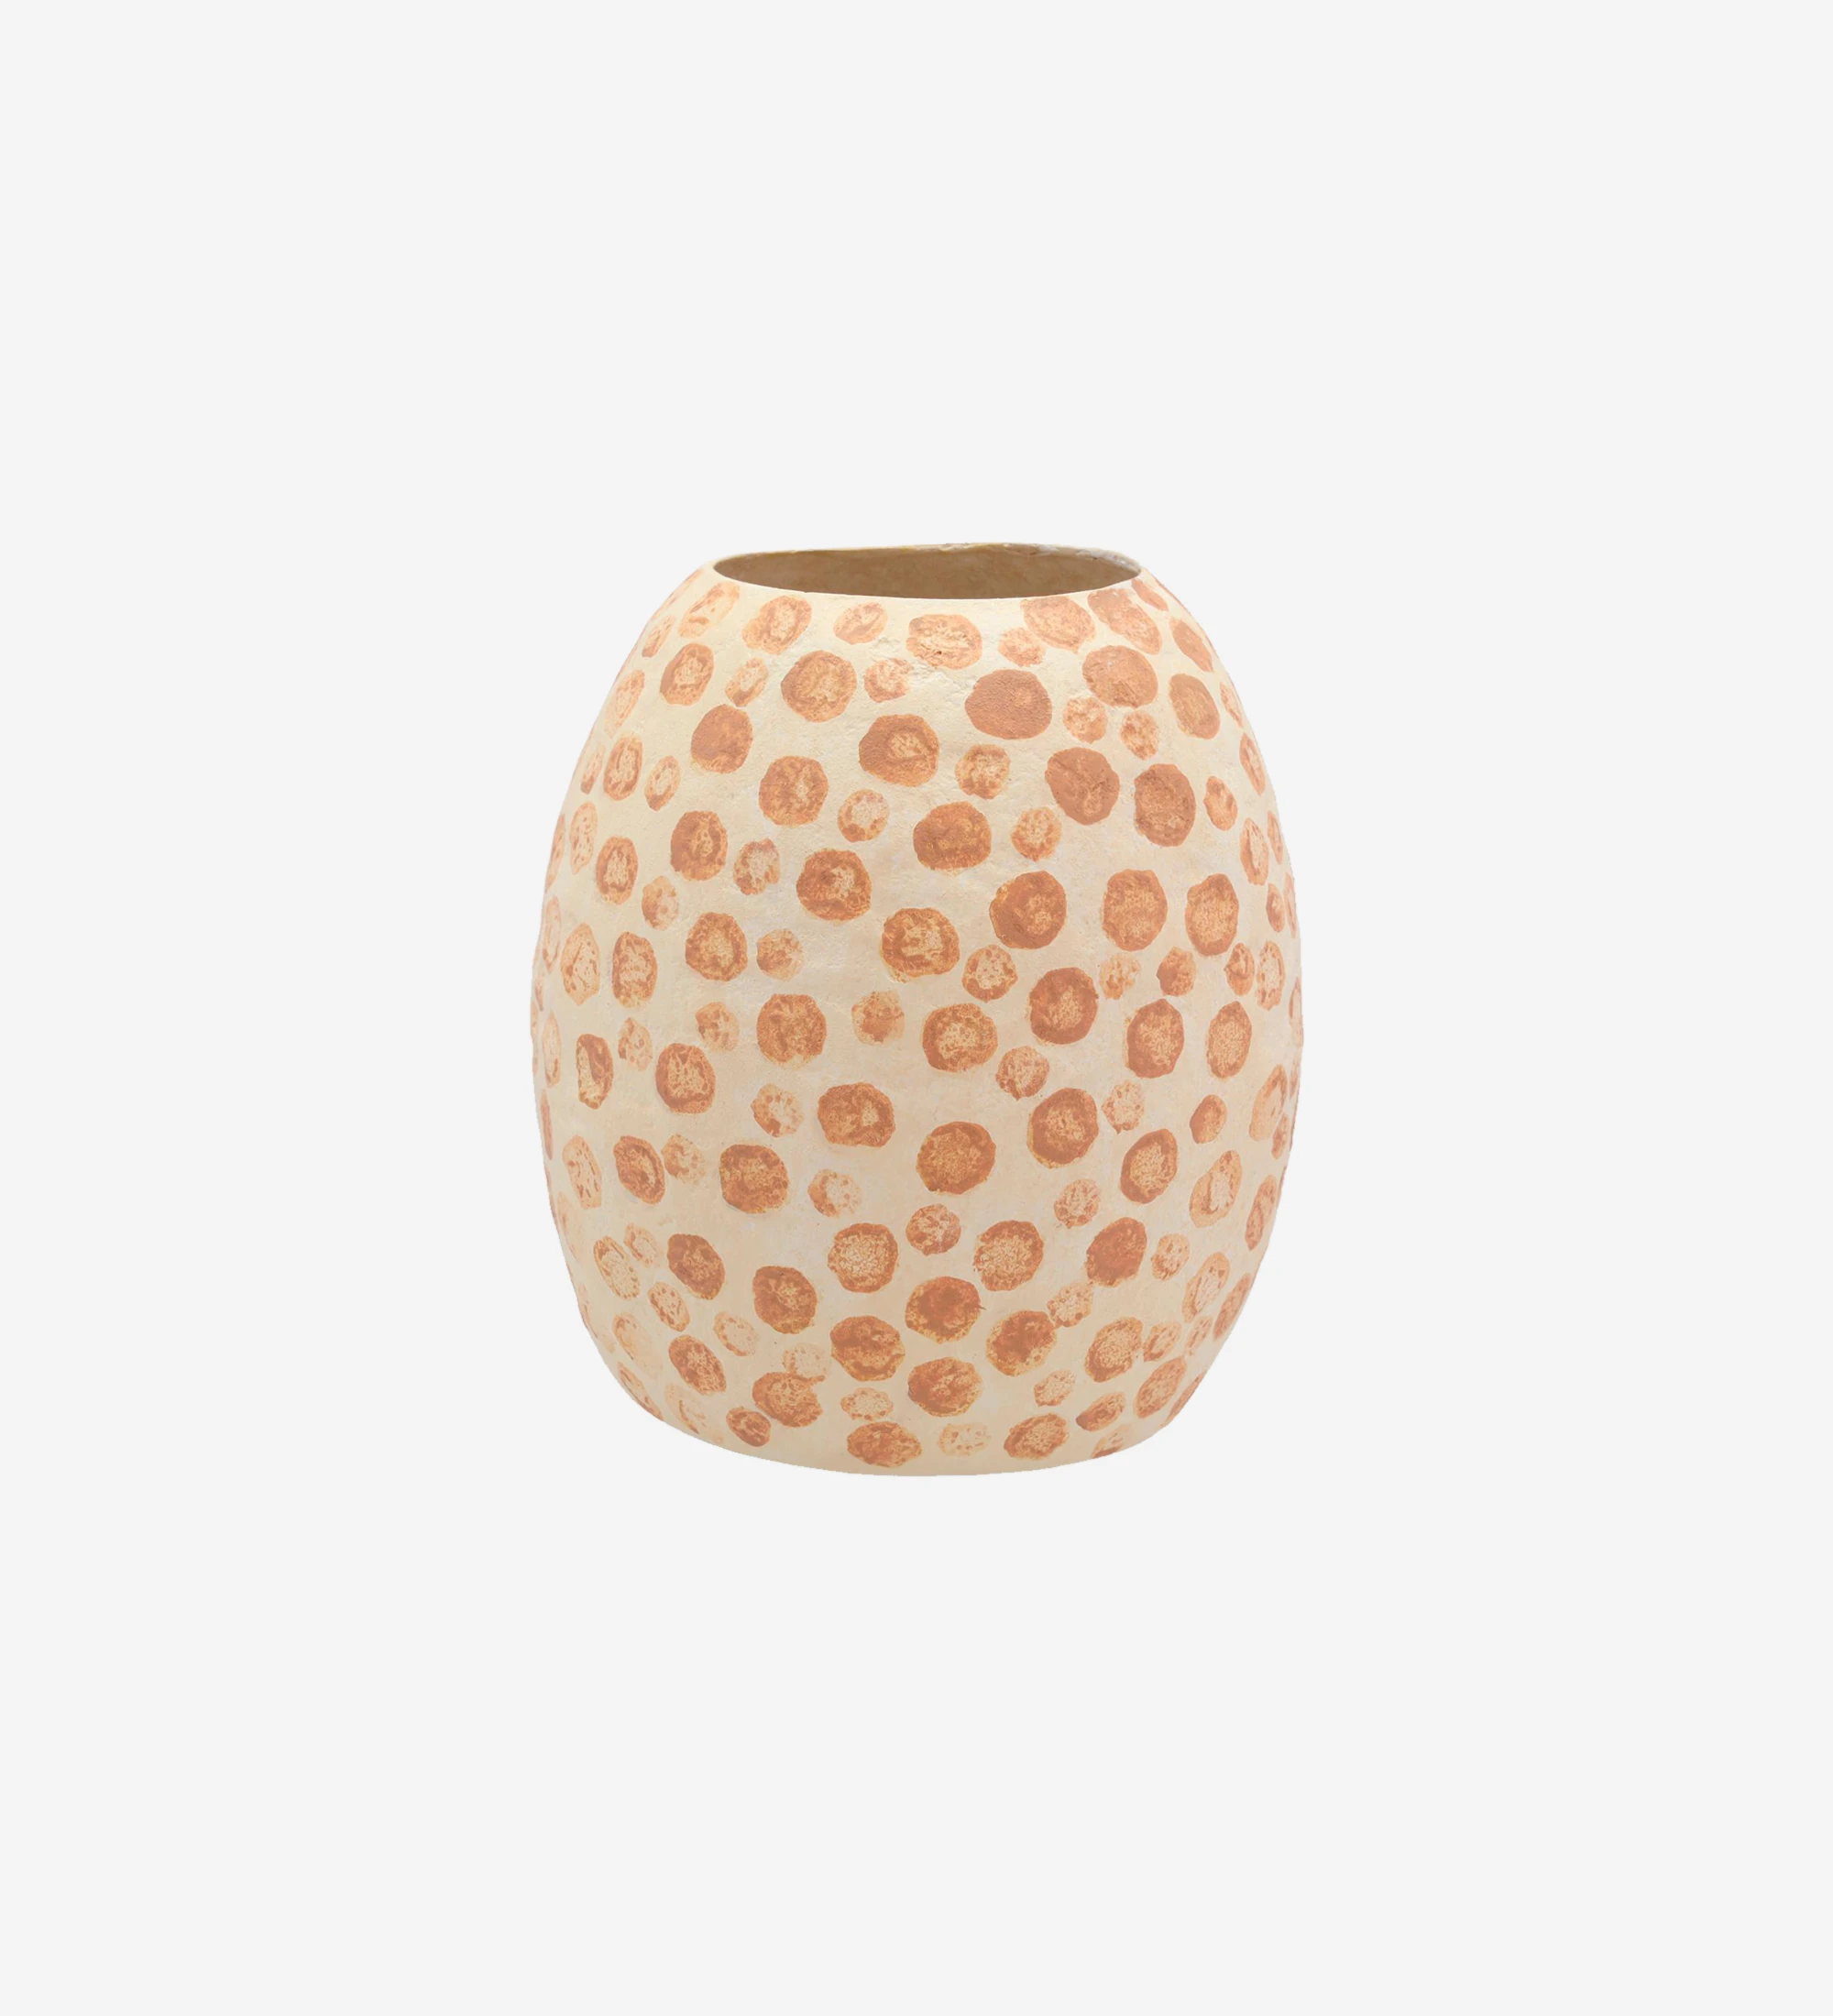 Handmade vase in cream papier-mâché with nougat-colored polka dots.